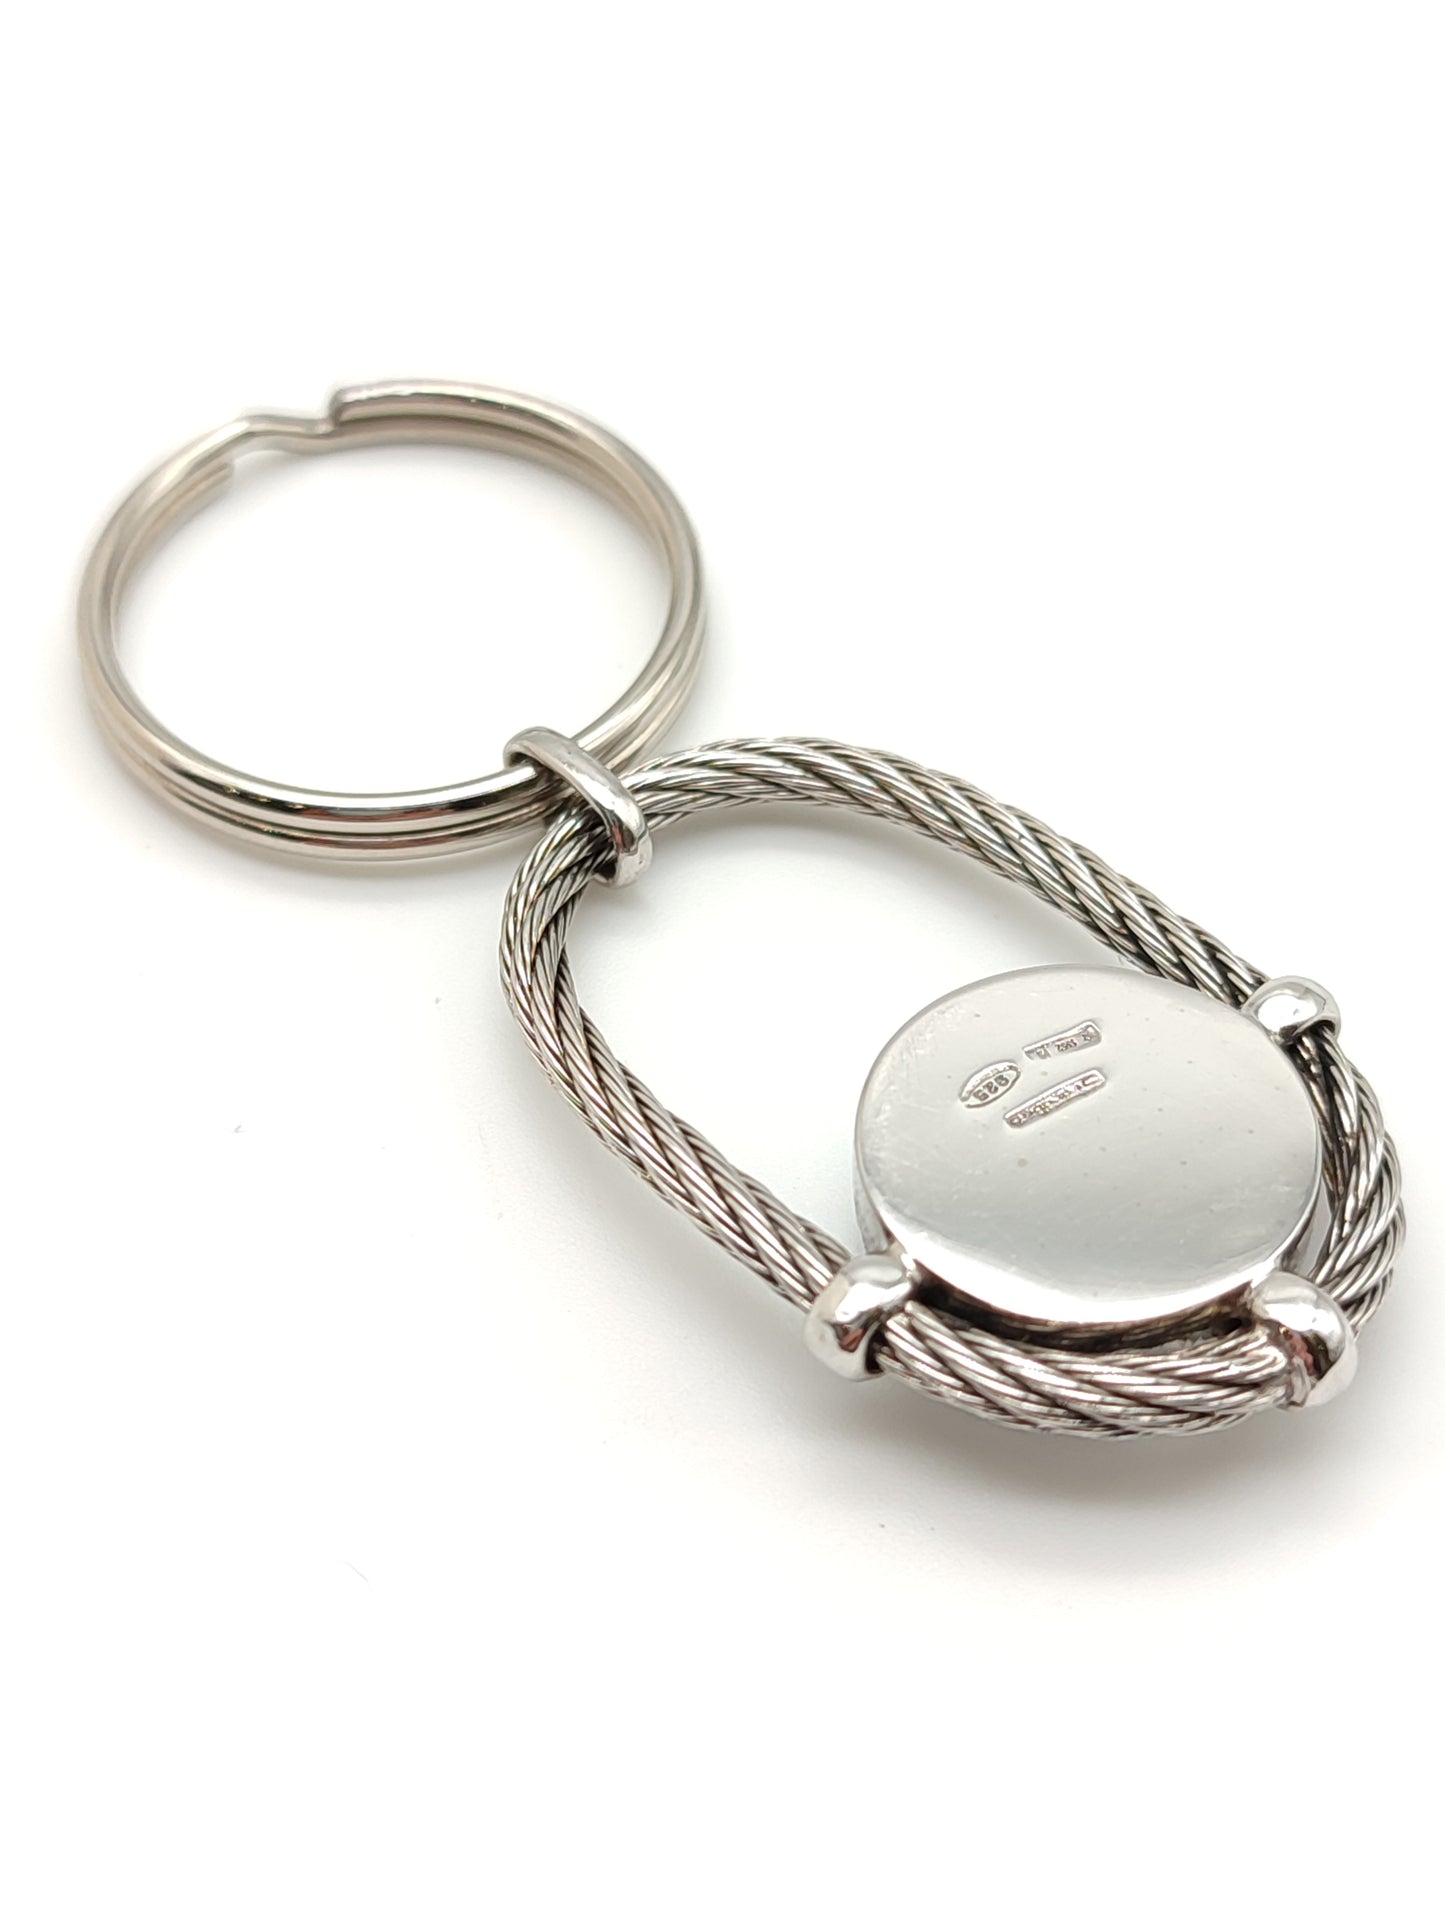 Silver and steel key ring with compass